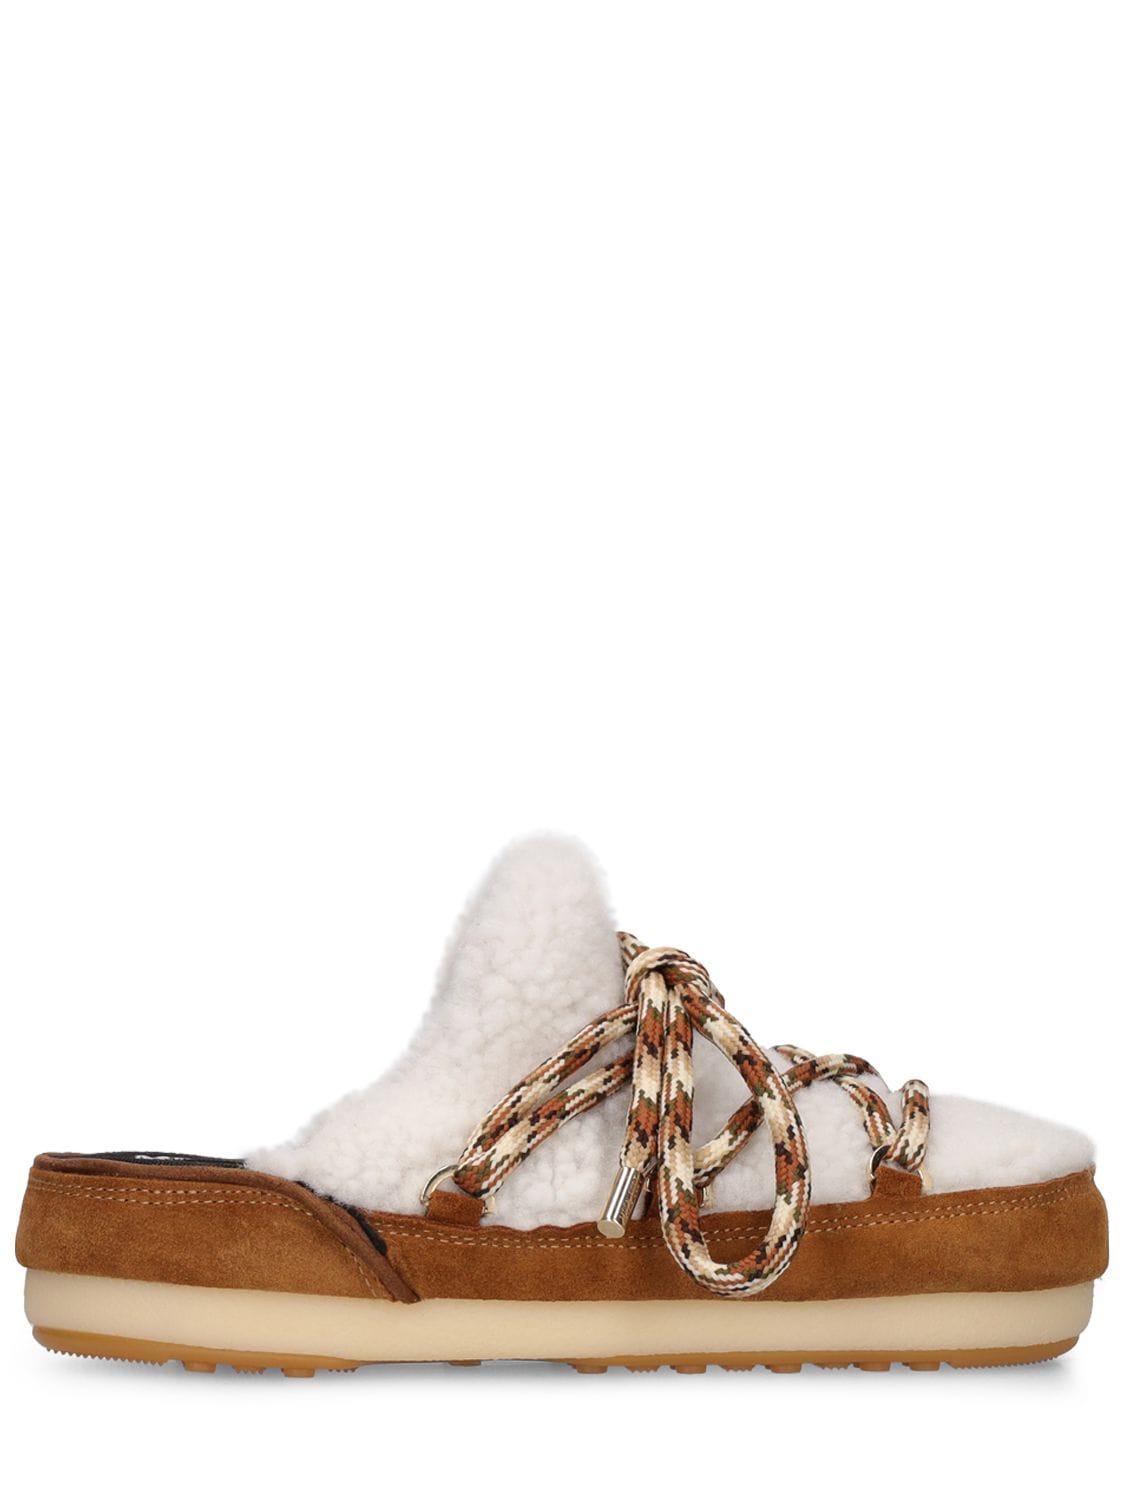 MOON BOOT SHEARLING & SUEDE MULES W/ LACES